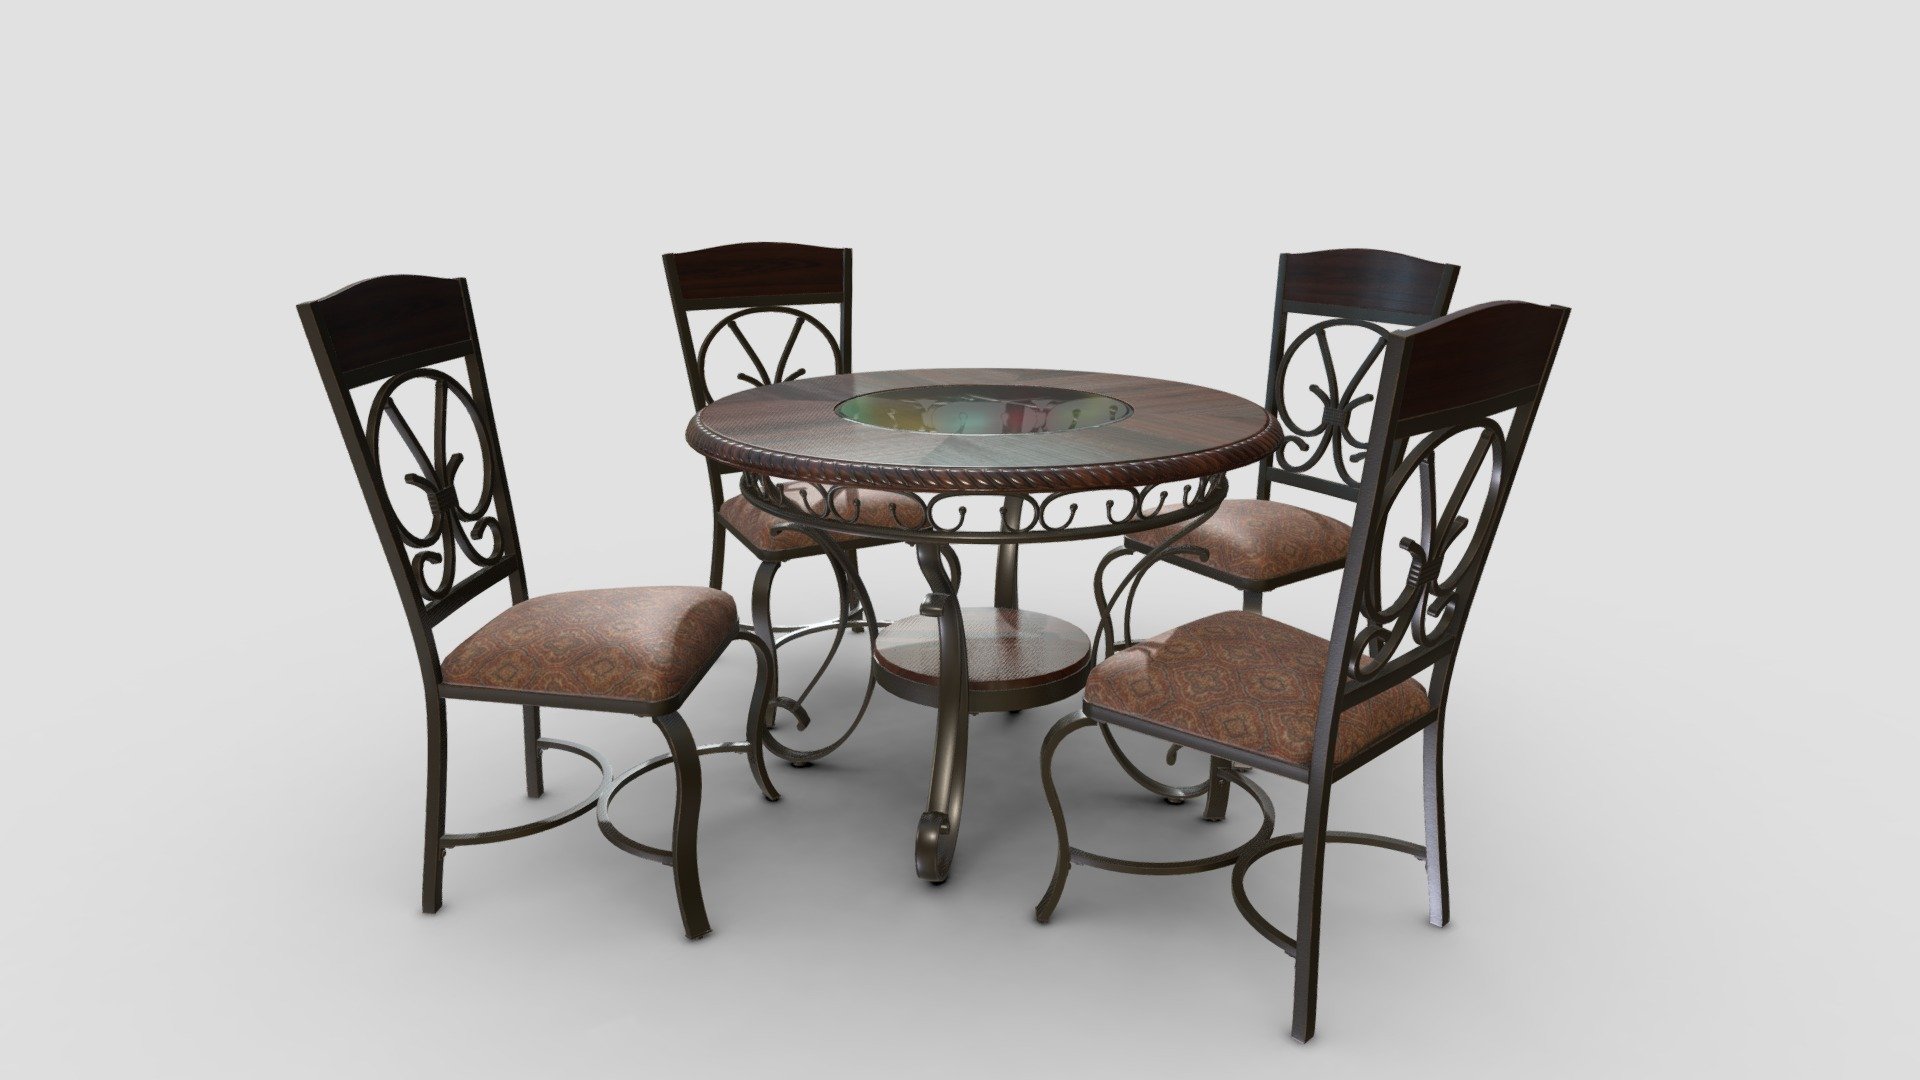 6 materials total; 3 per model. 4k textures using the metallic-roughness workflow. The transparency on the table was designed to work with a refraction shader 3d model